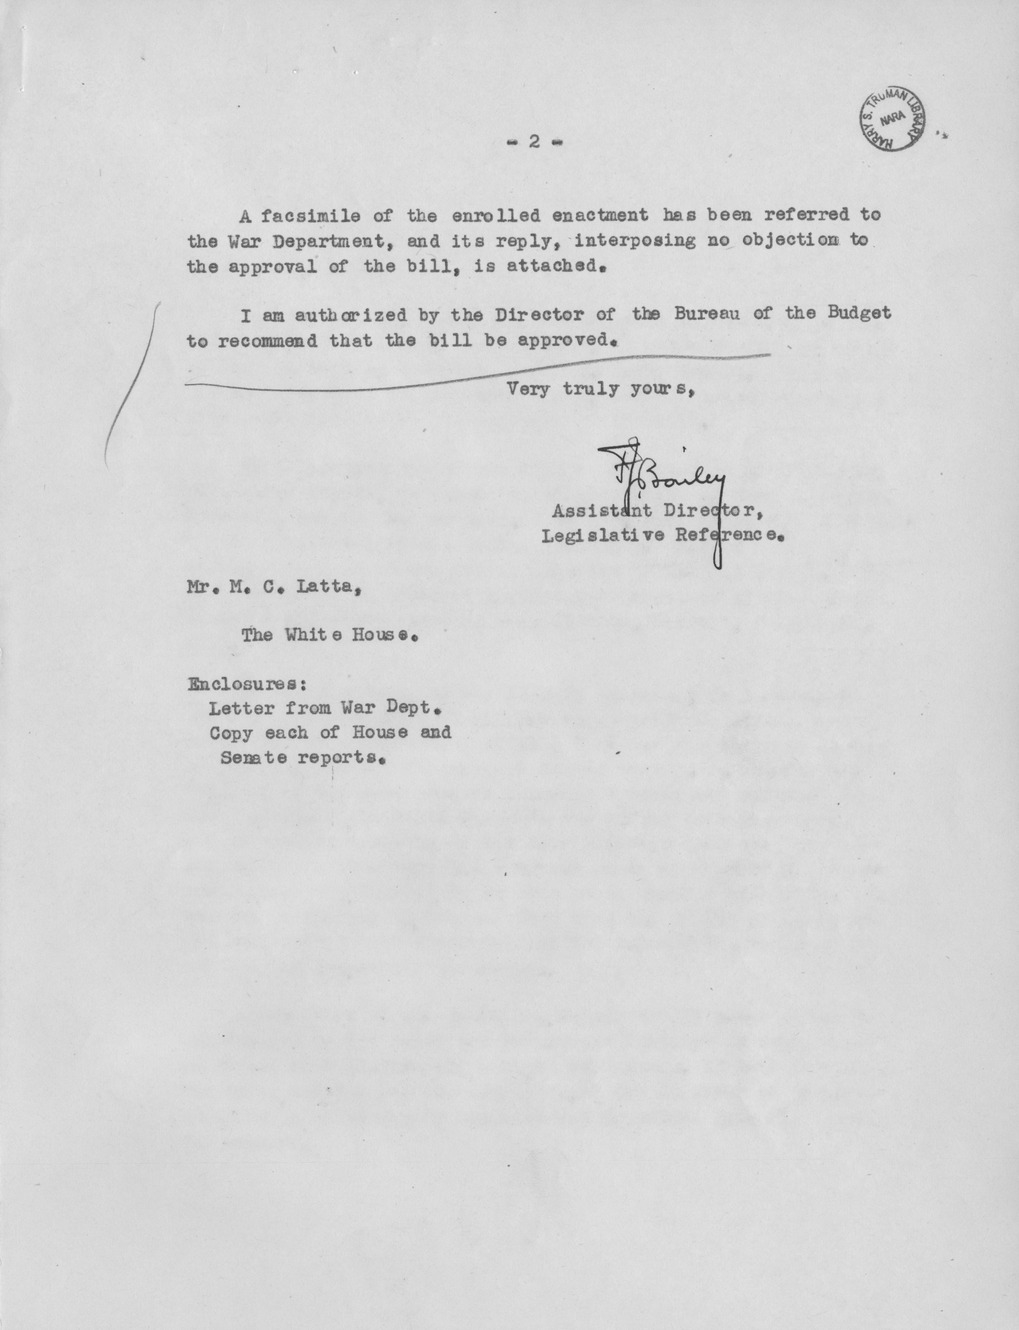 Memorandum from Frederick J. Bailey to M. C. Latta, S. 683, For the Relief of Mrs. Marie Nepple, as Executrix of the Estate of Earl W. Nepple, Deceased, and Mrs. Marie Nepple, Individually, with Attachments